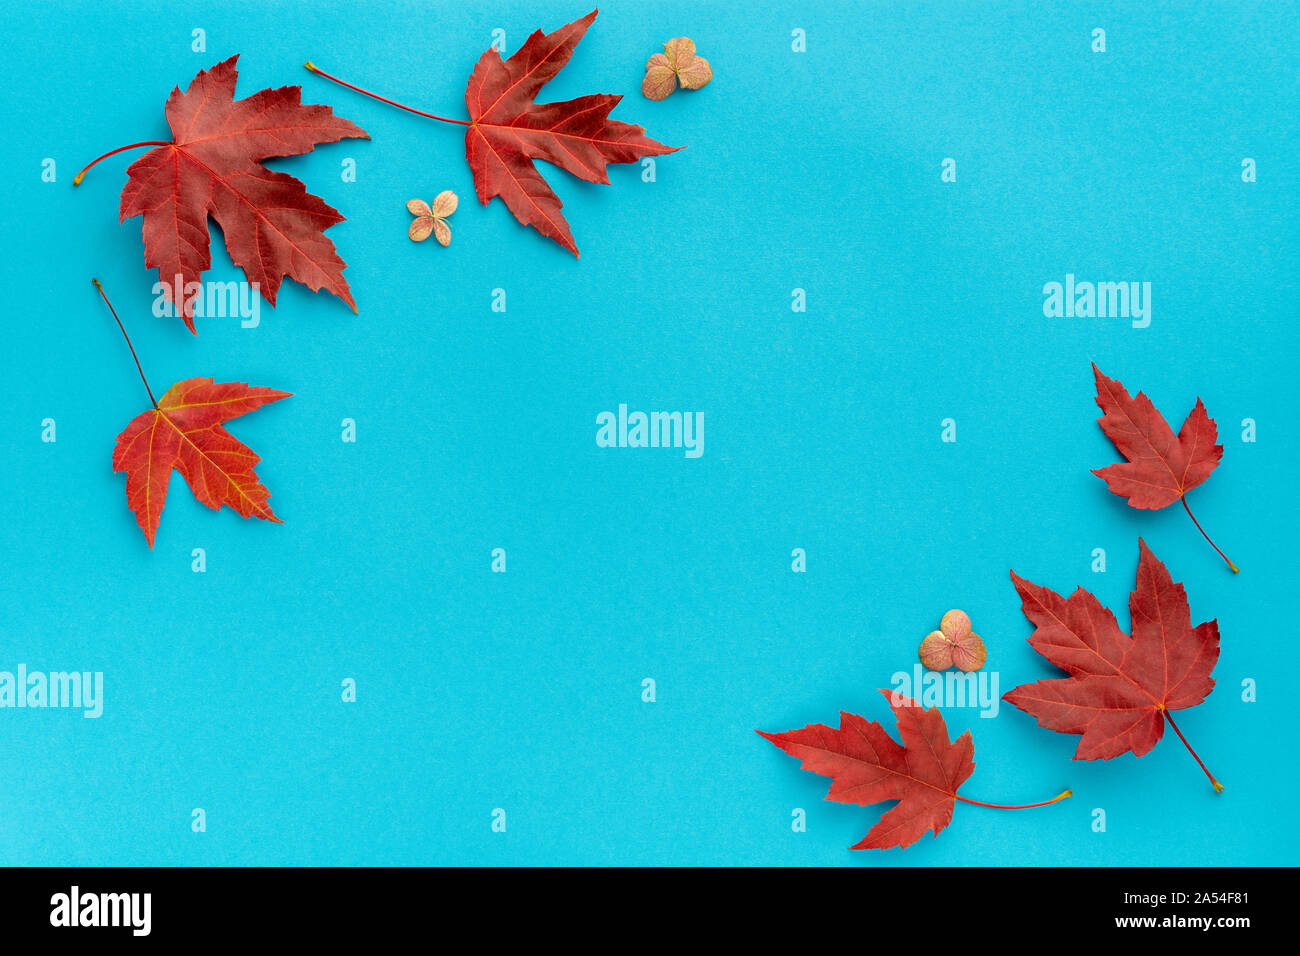 Autumn leaf flat lay composition. Frame from red maple leaves on blue paper background. Autumn concept. Fall leaves design. Top view, copy space Stock Photo